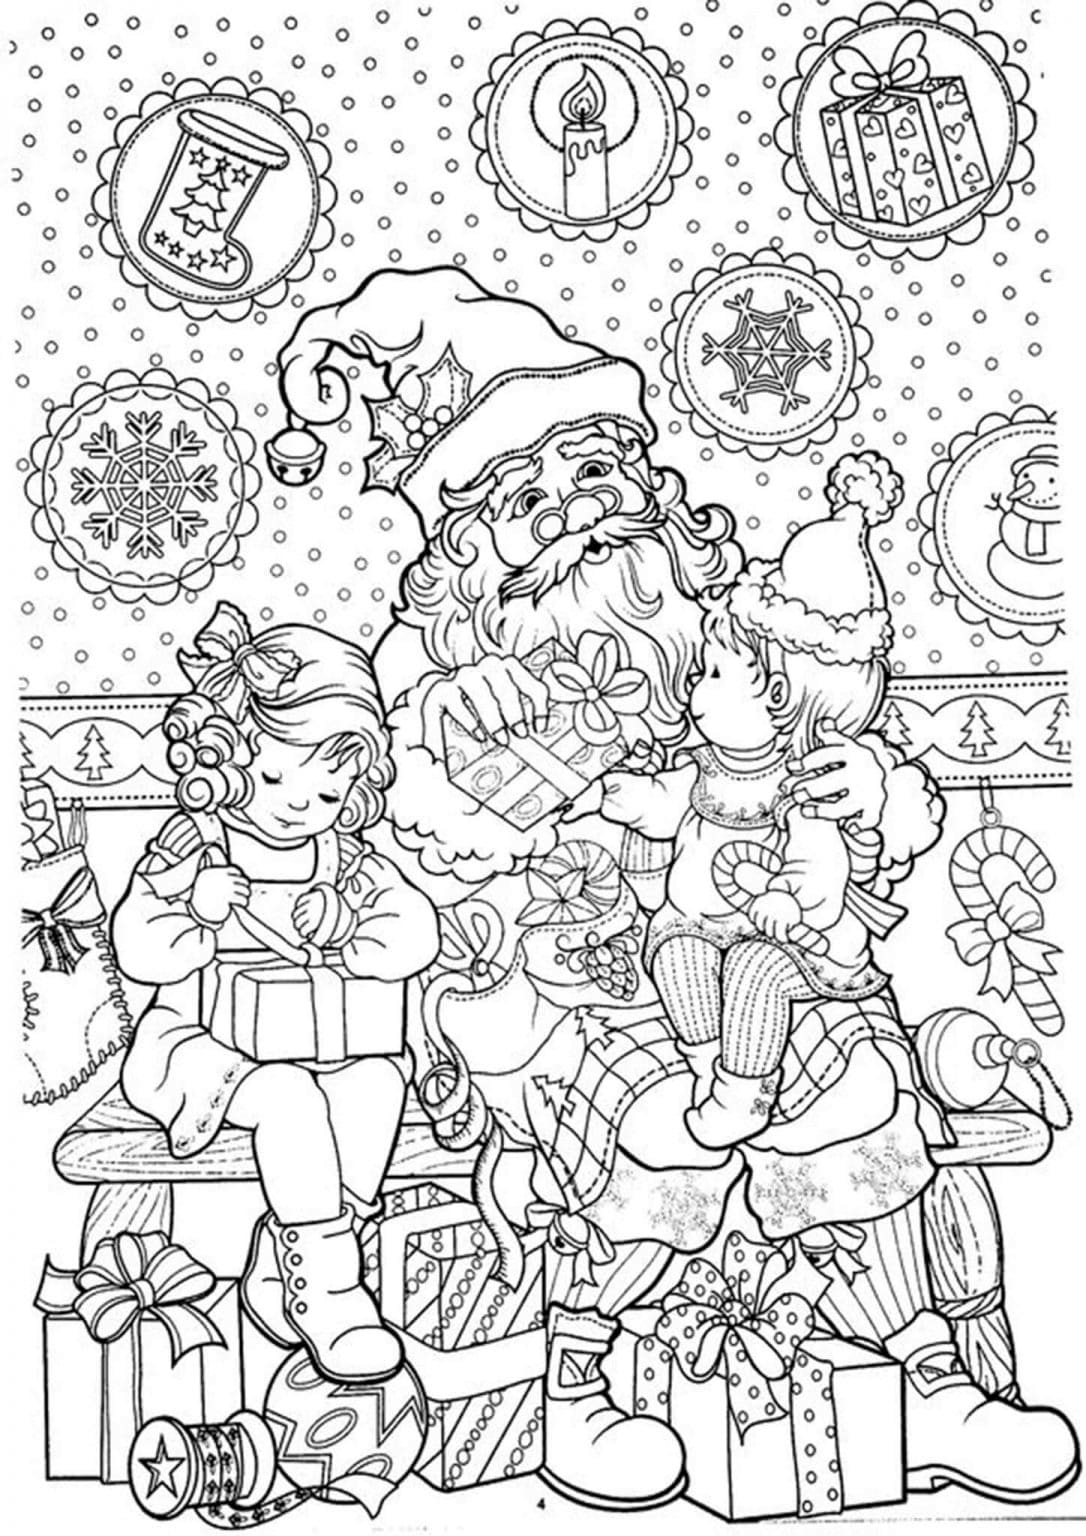 Santa and the Kids | old fashioned christmas coloring pages | easy christmas coloring pages